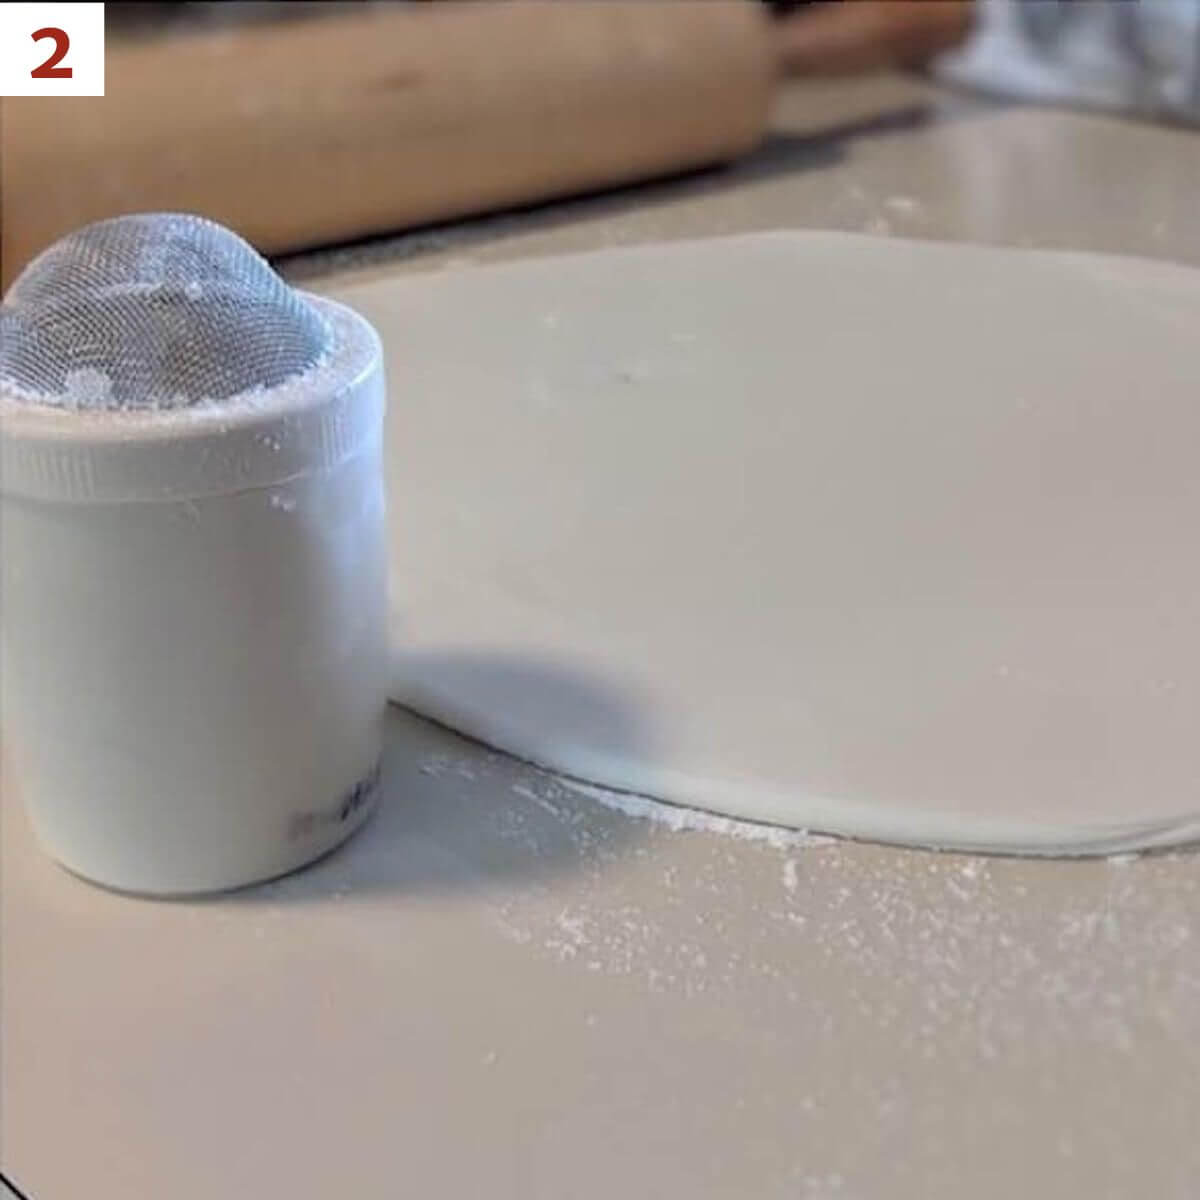 Marshmallow fondant rolled out next to a powdered sugar shaker.